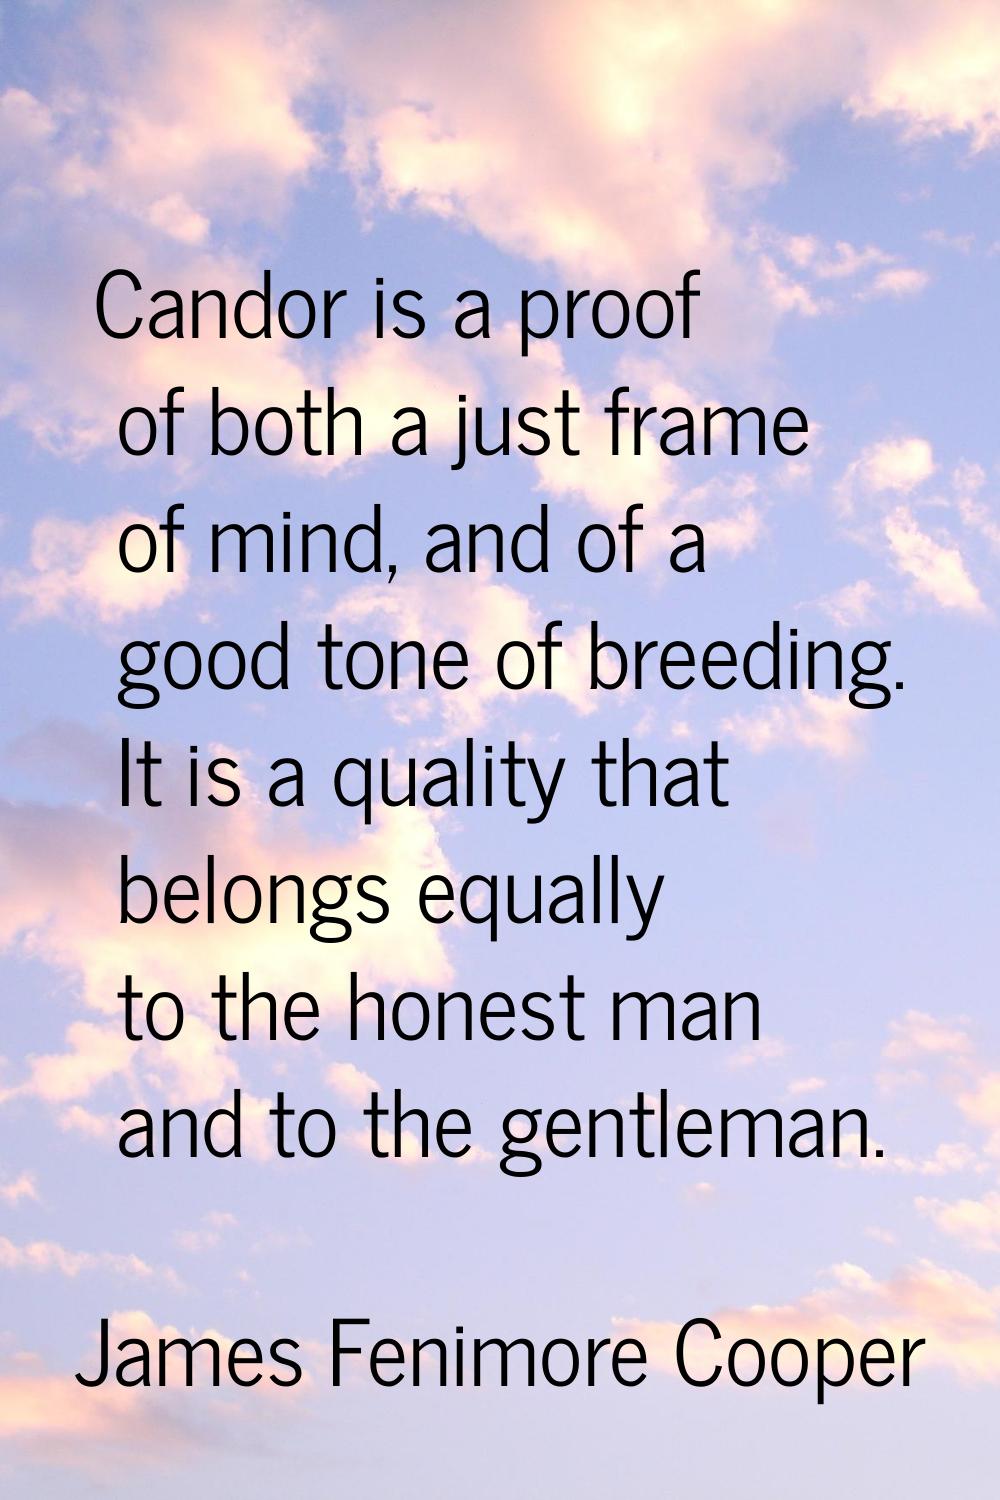 Candor is a proof of both a just frame of mind, and of a good tone of breeding. It is a quality tha